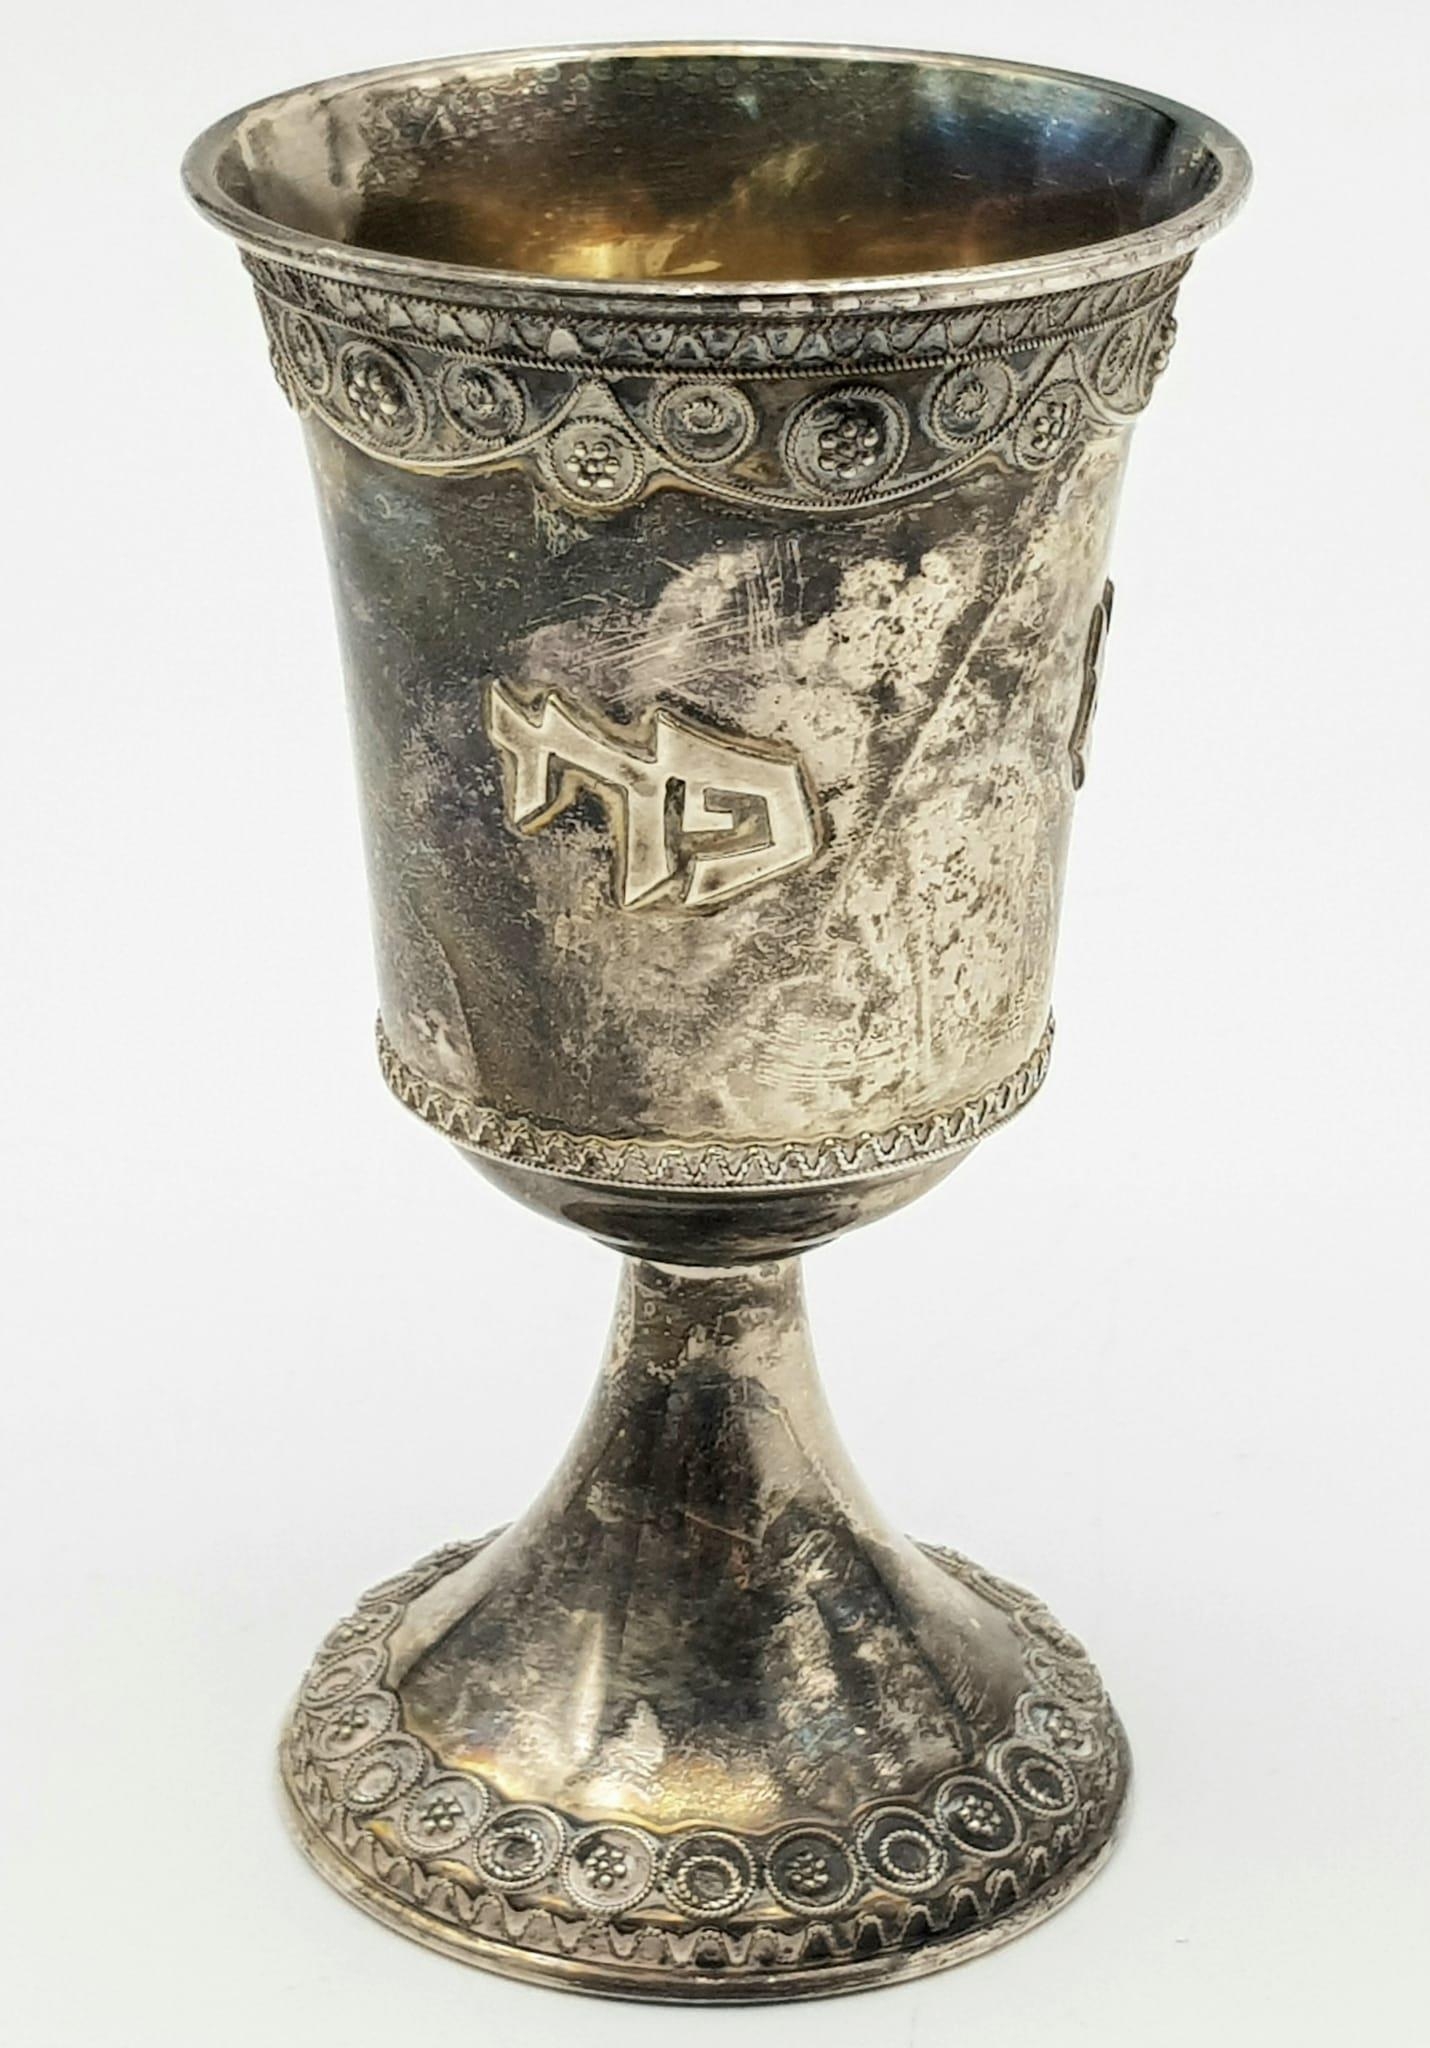 A SOLID SILVER KIDDISH CUP WITH THE BLESSING FOR WINE WRITTEN AROUND IT. 57.8gms 10cms TALL - Image 2 of 7